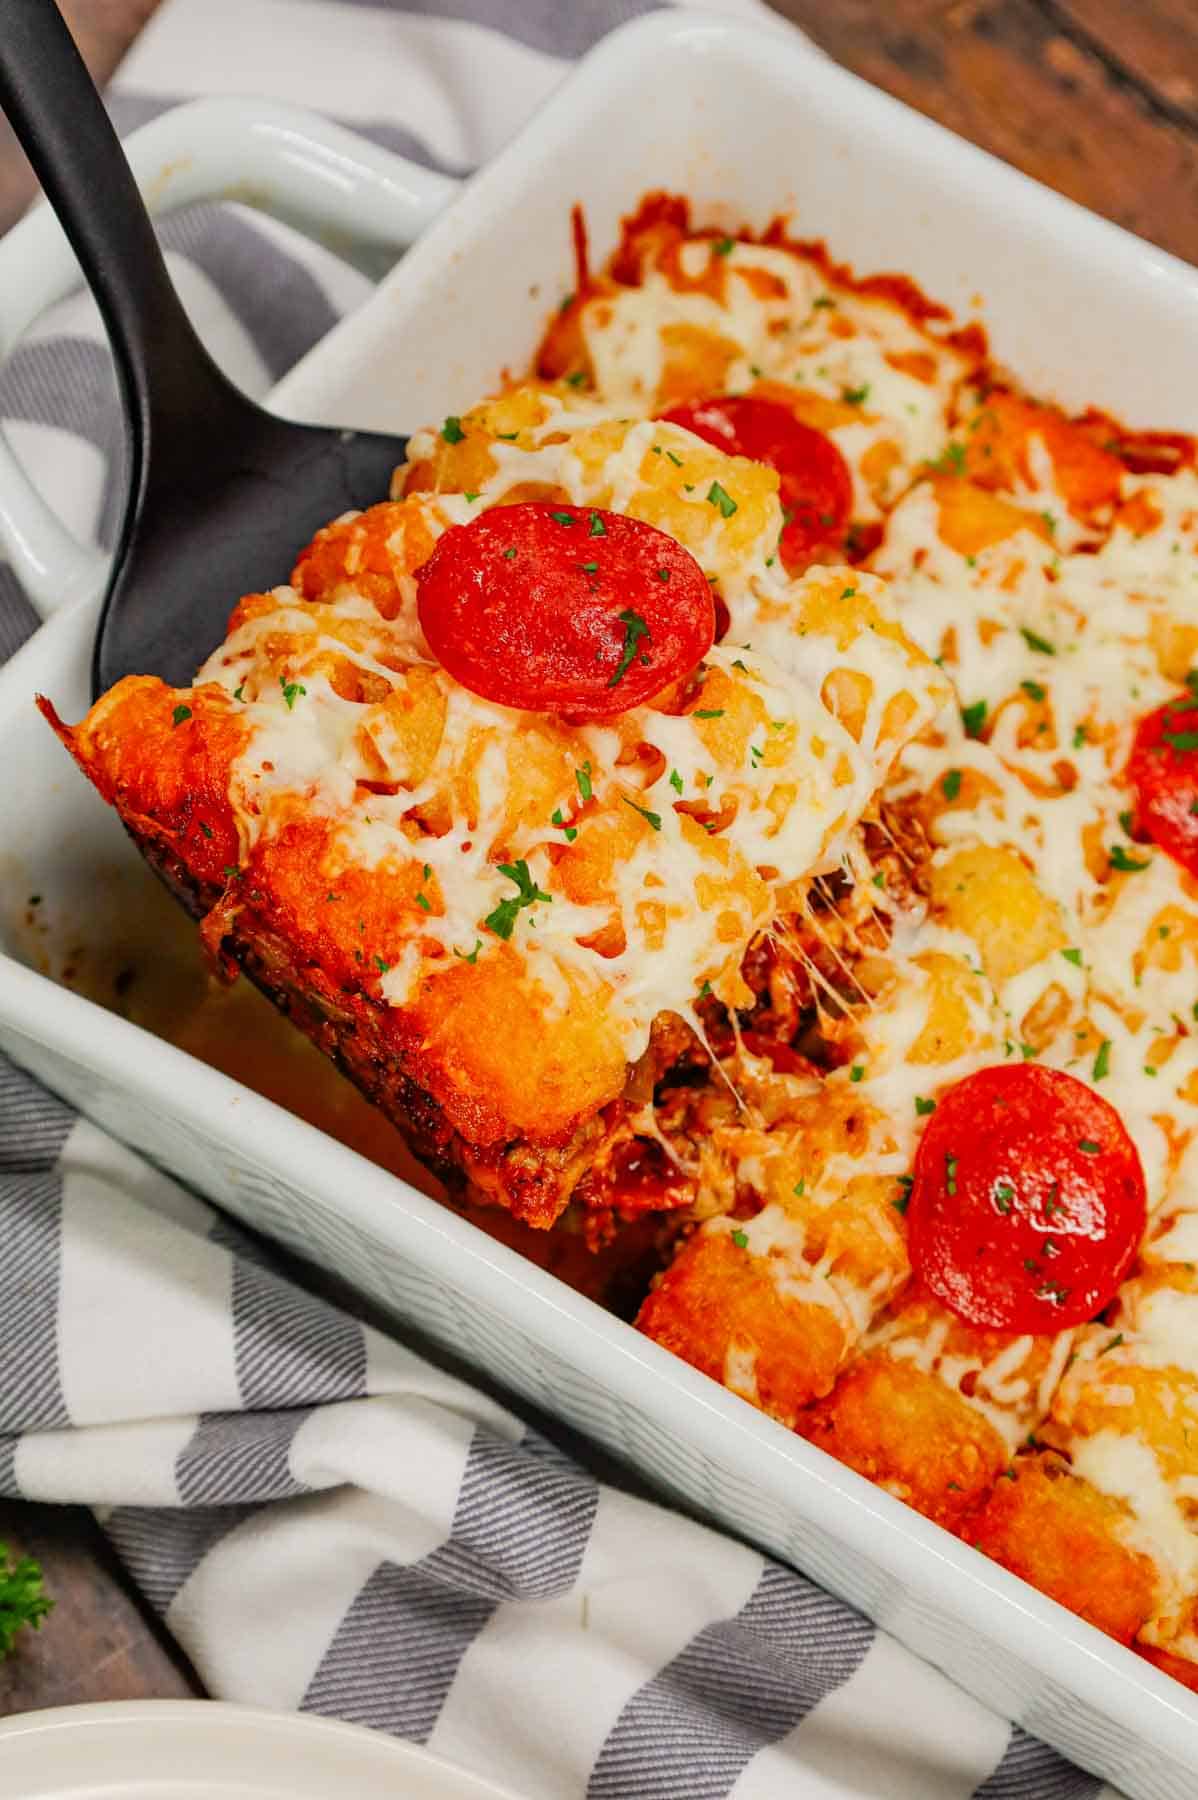 Pizza Tater Tot Casserole is a hearty casserole loaded with ground beef, Italian sausage, pepperoni, green peppers, onions, pizza sauce, mozzarella cheese and crispy tater tots.